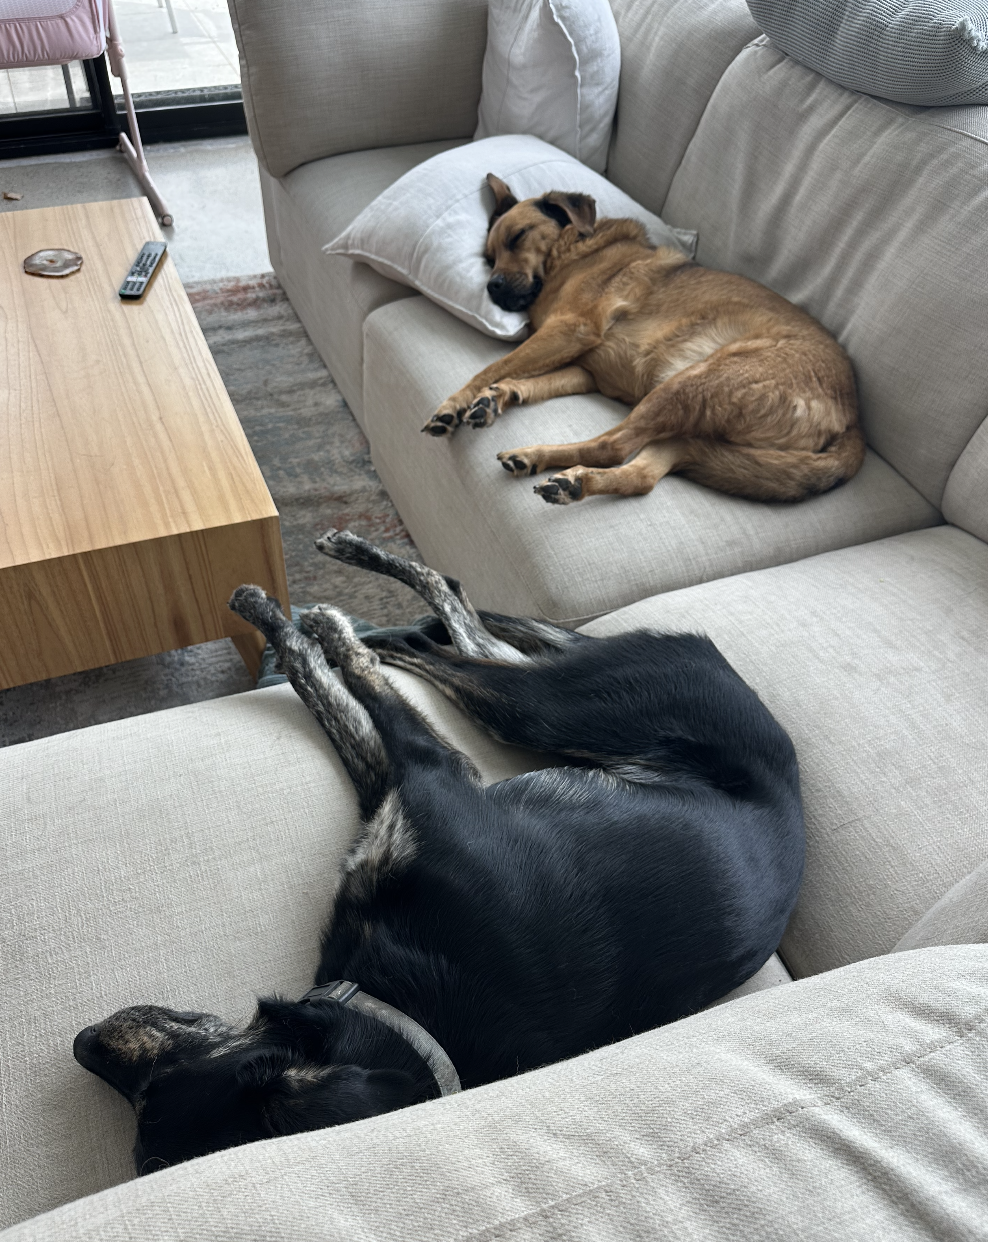 Two doggos sleeping on a couch